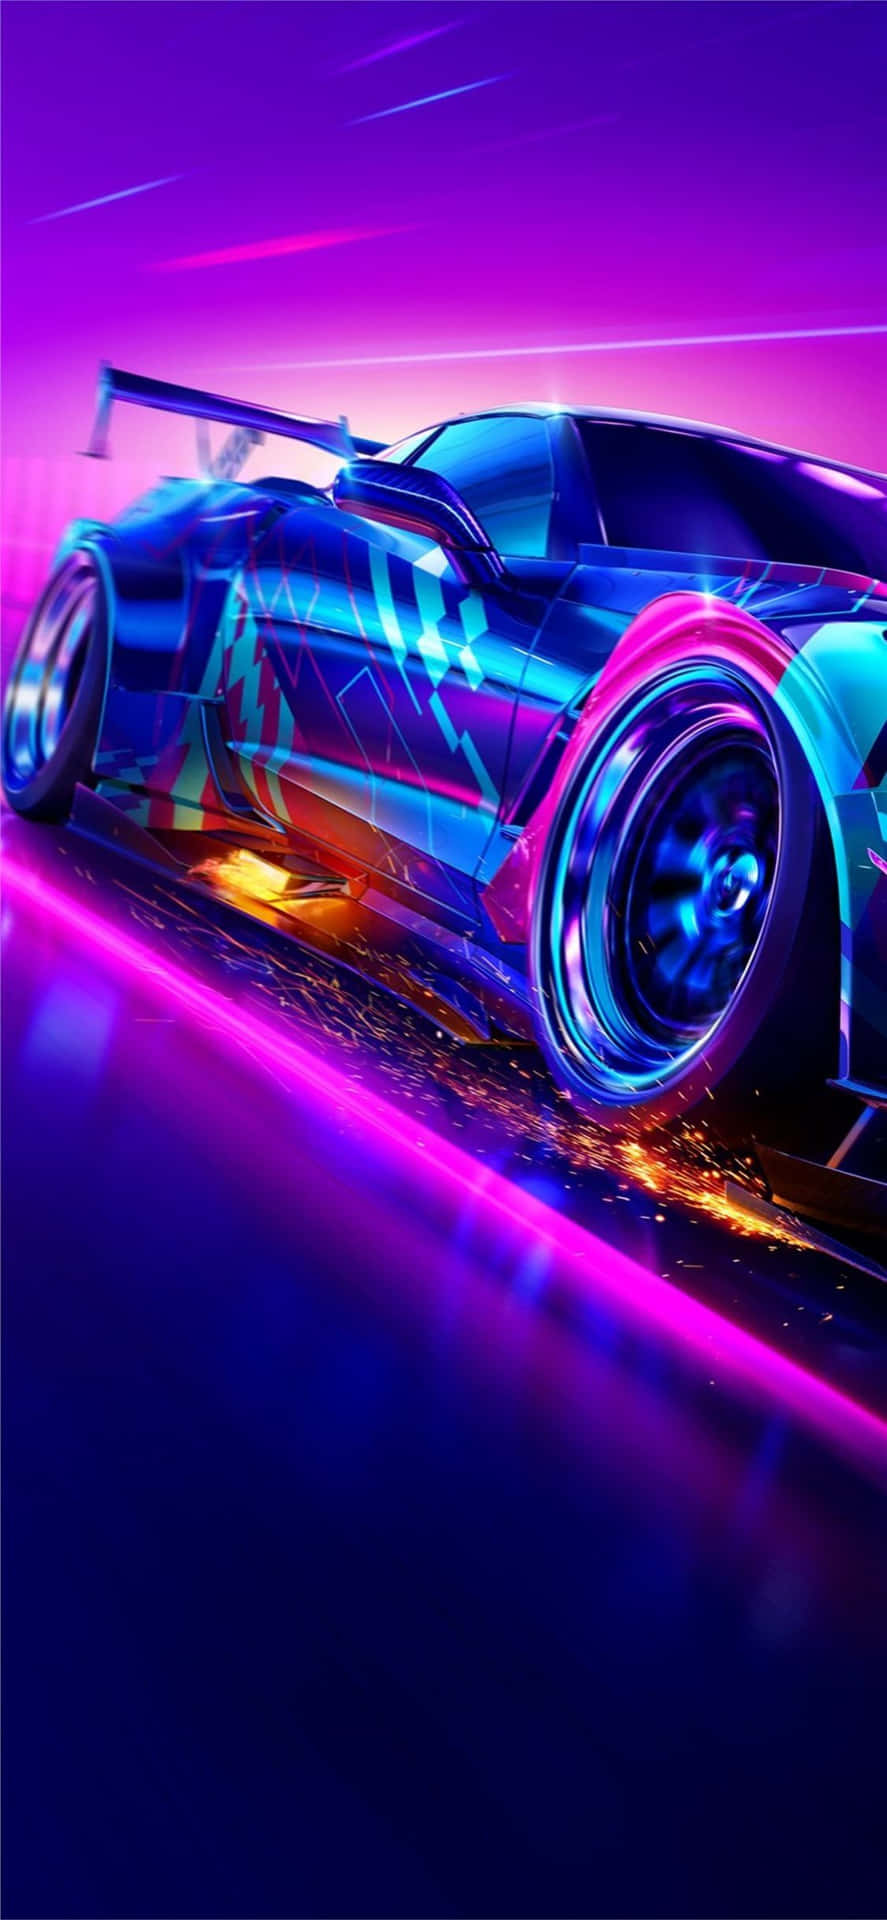 A Car Driving Down A Road With Neon Lights